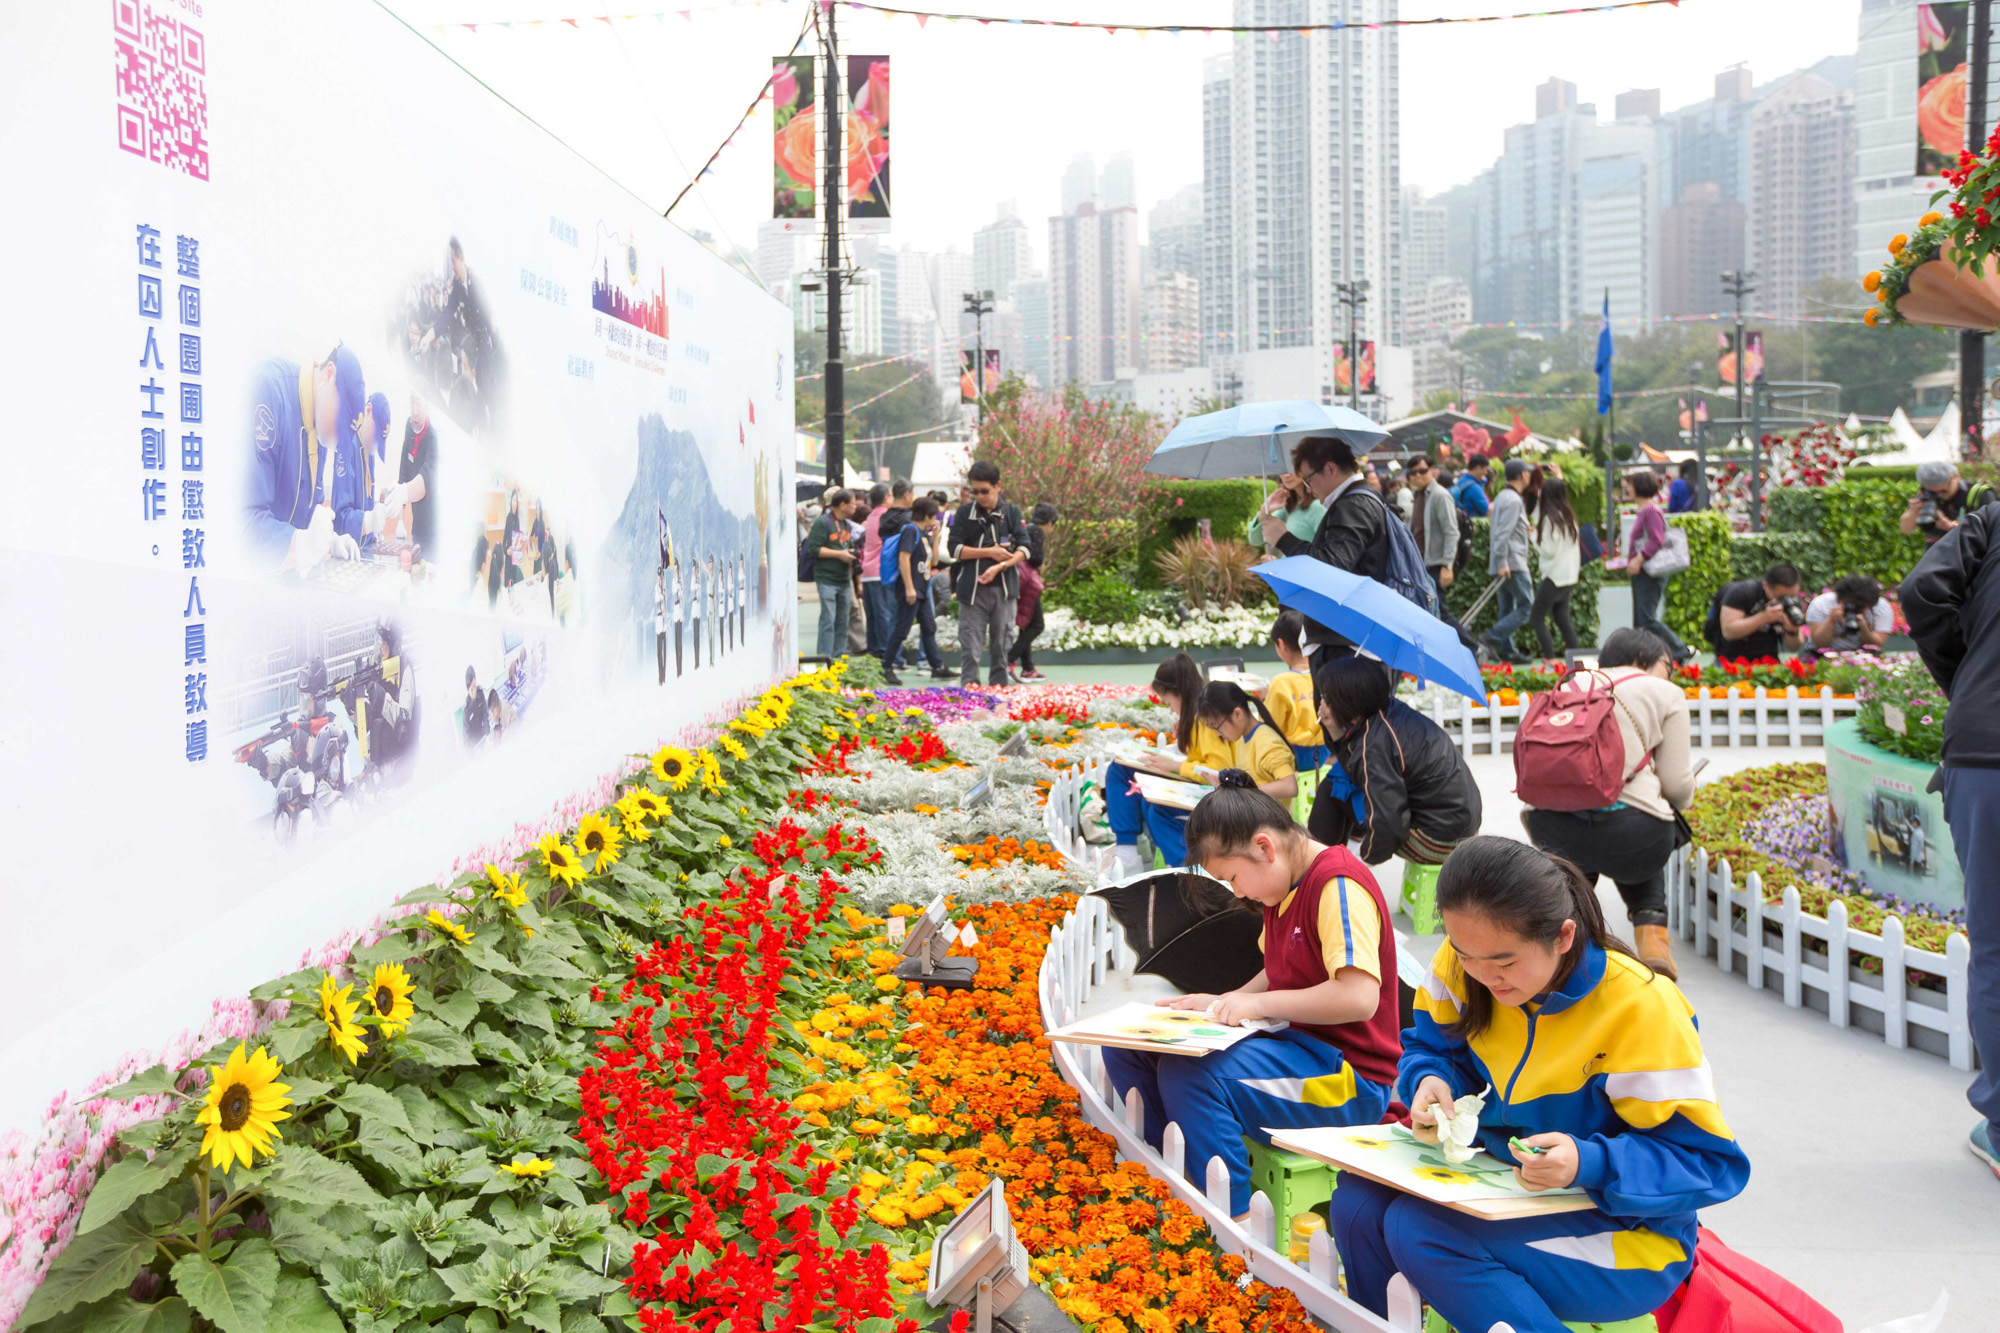 Photo 1 - Every year, CSD would participate in Hong Kong Flower Show and stage to exhibit the fruits of vocational training attended by persons in custody.